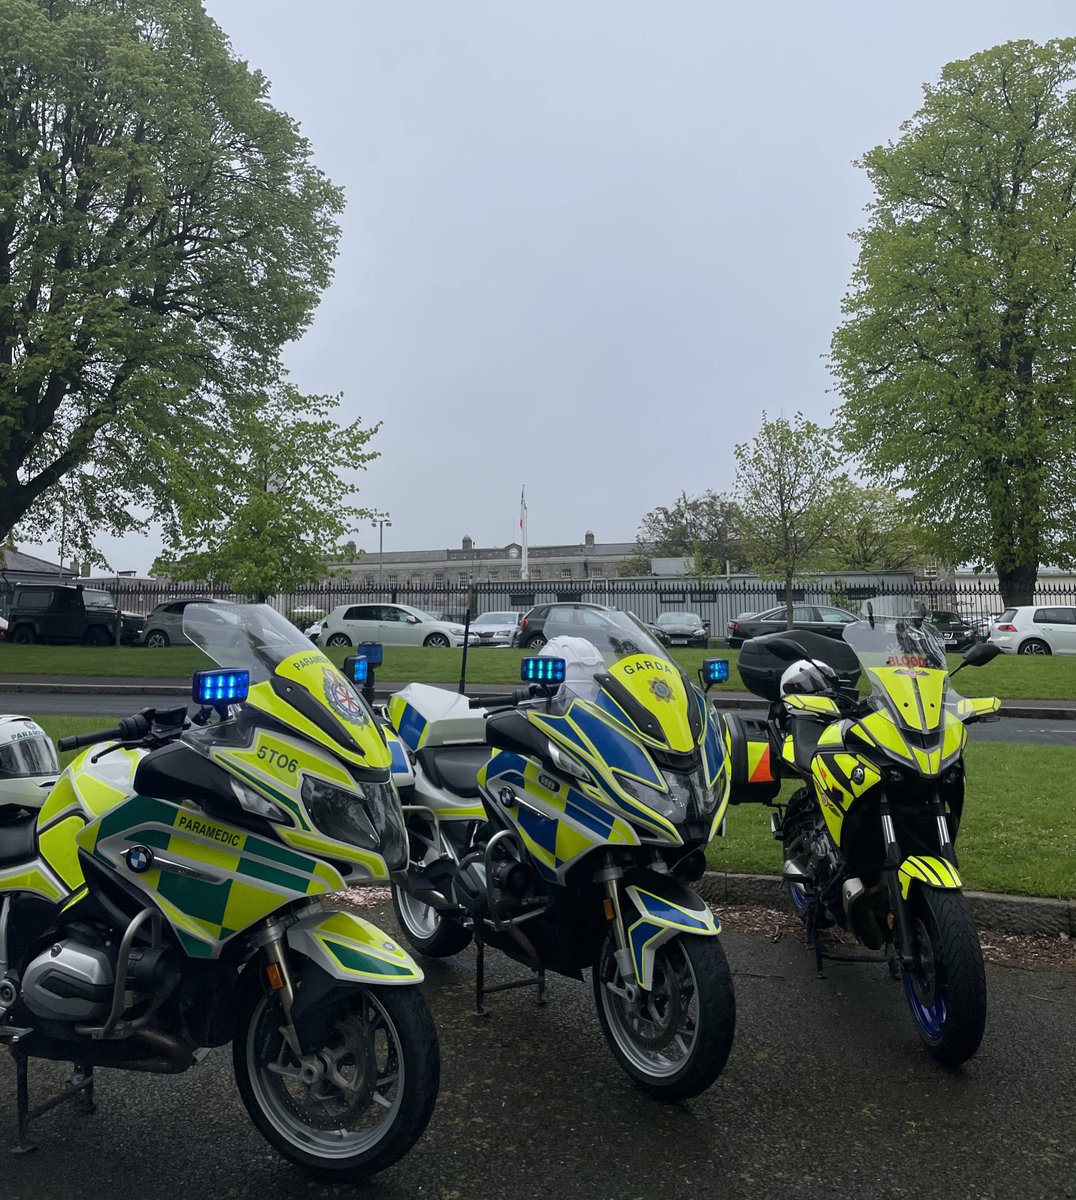 We’re here today at Garda headquarters for the launch of our #TimeToTalk campaign and May Bank Holiday road safety appeal @GardaTraffic